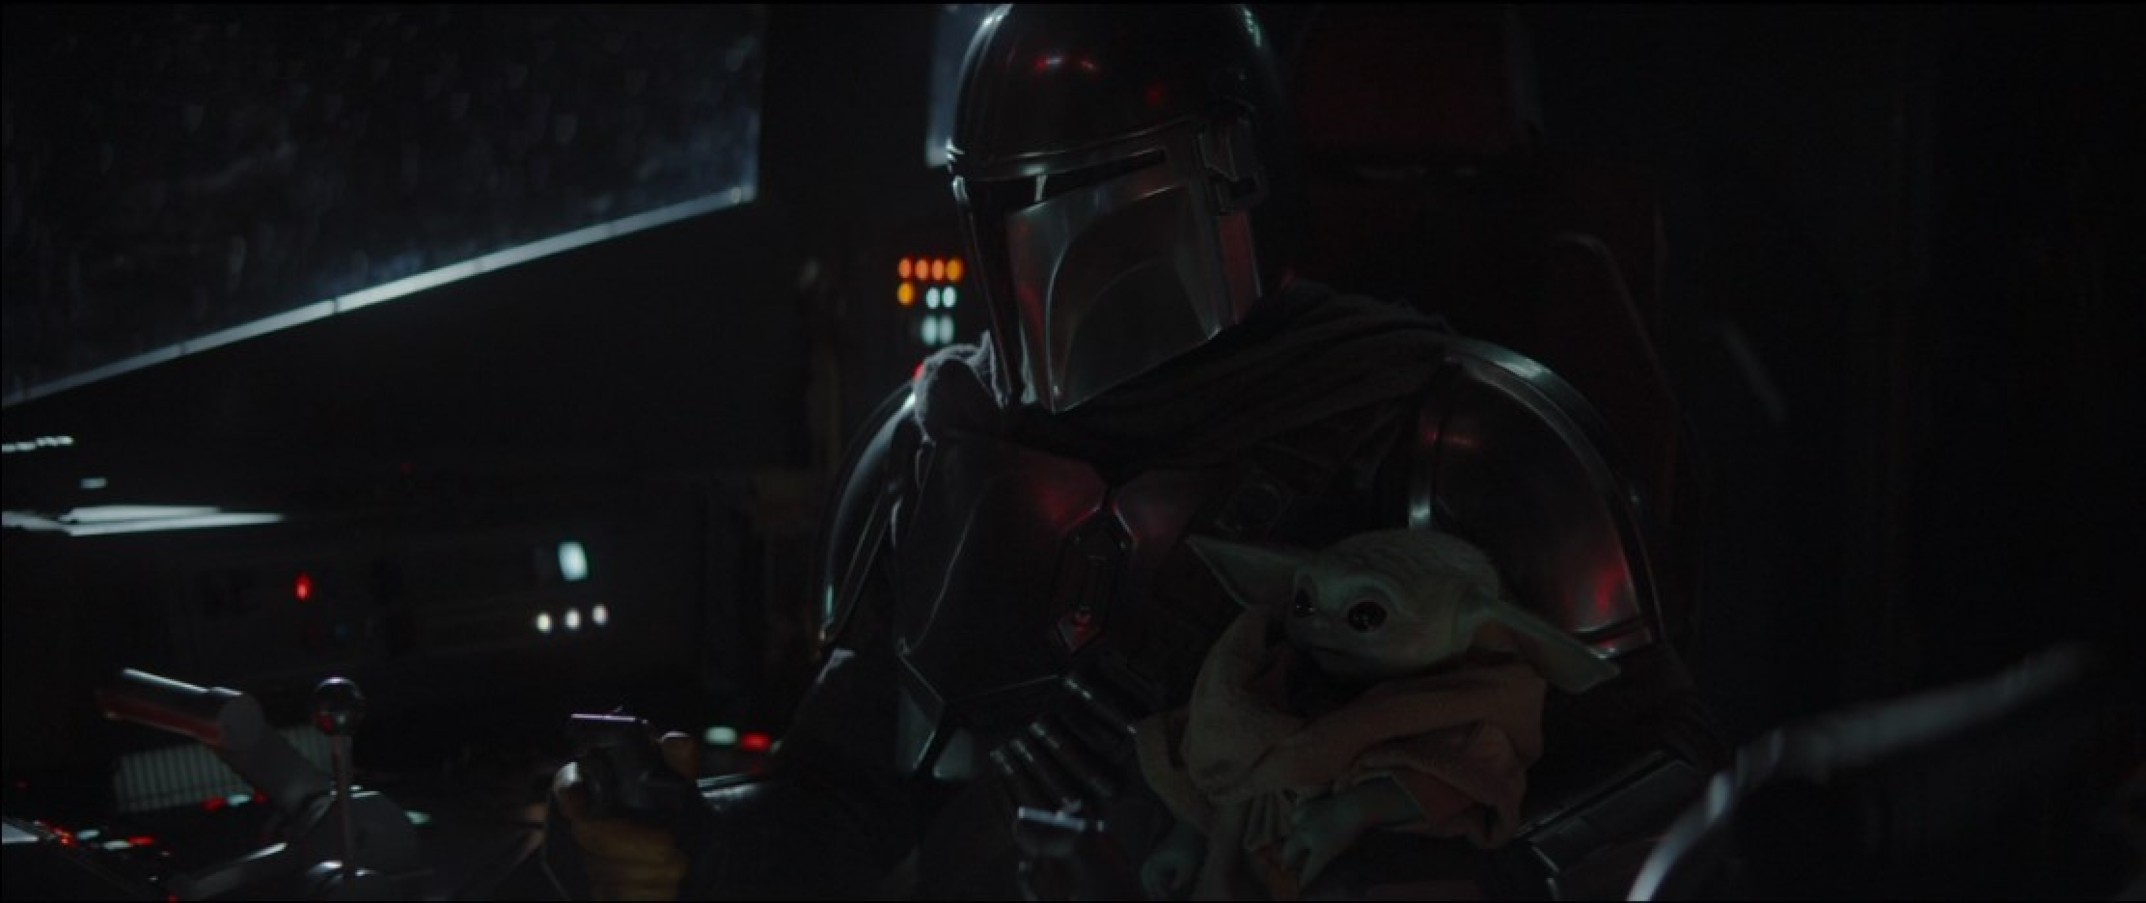 Star Wars characters the Mandalorian and Baby Yoda sit in the Razor Crest ship.